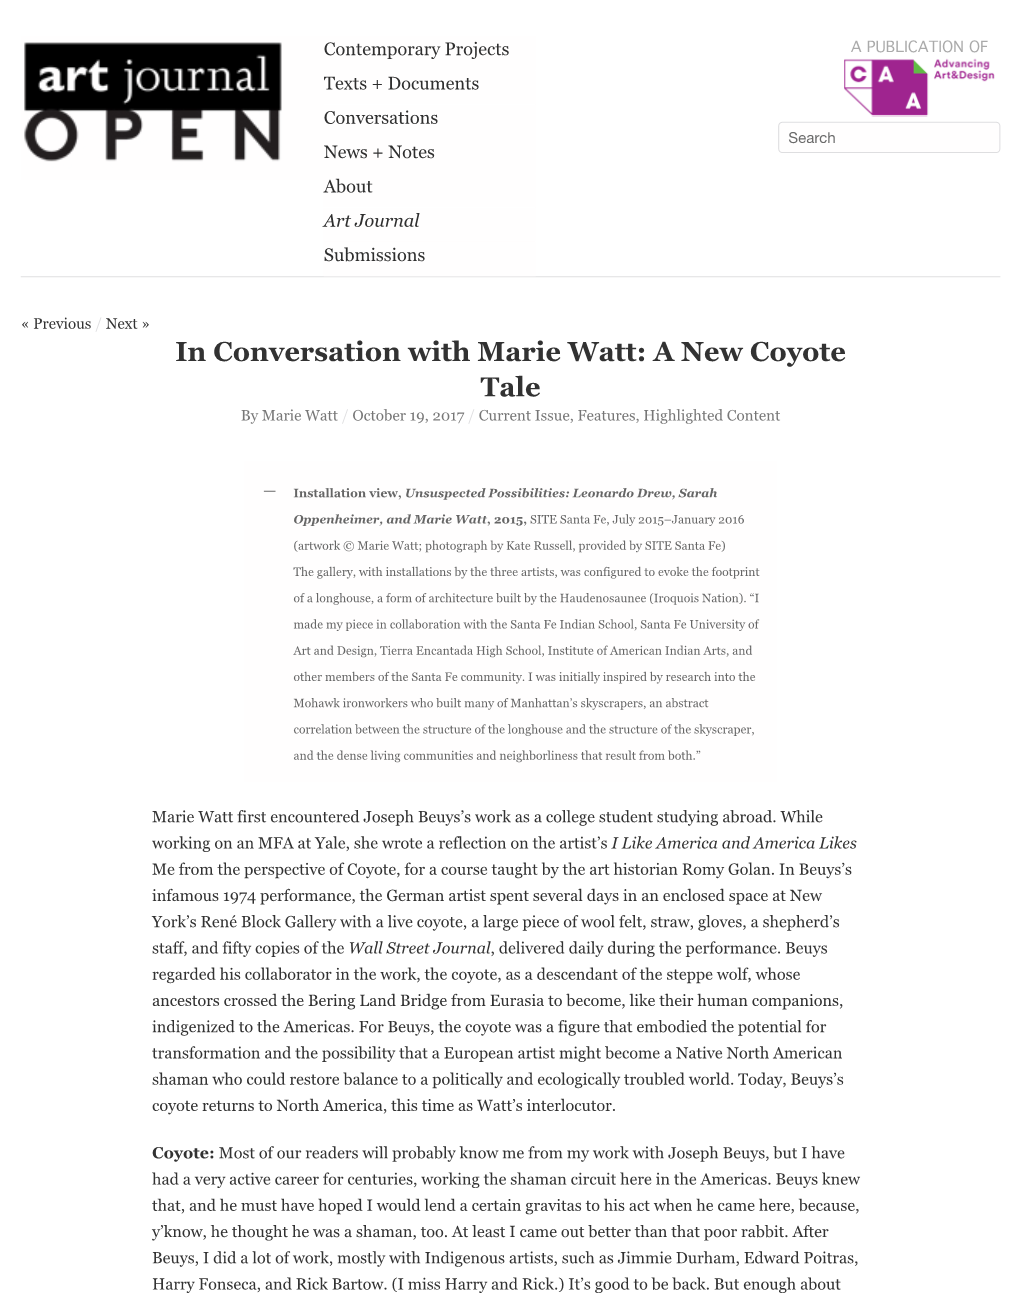 In Conversation with Marie Watt: a New Coyote Tale by Marie Watt / October 19, 2017 / Current Issue, Features, Highlighted Content